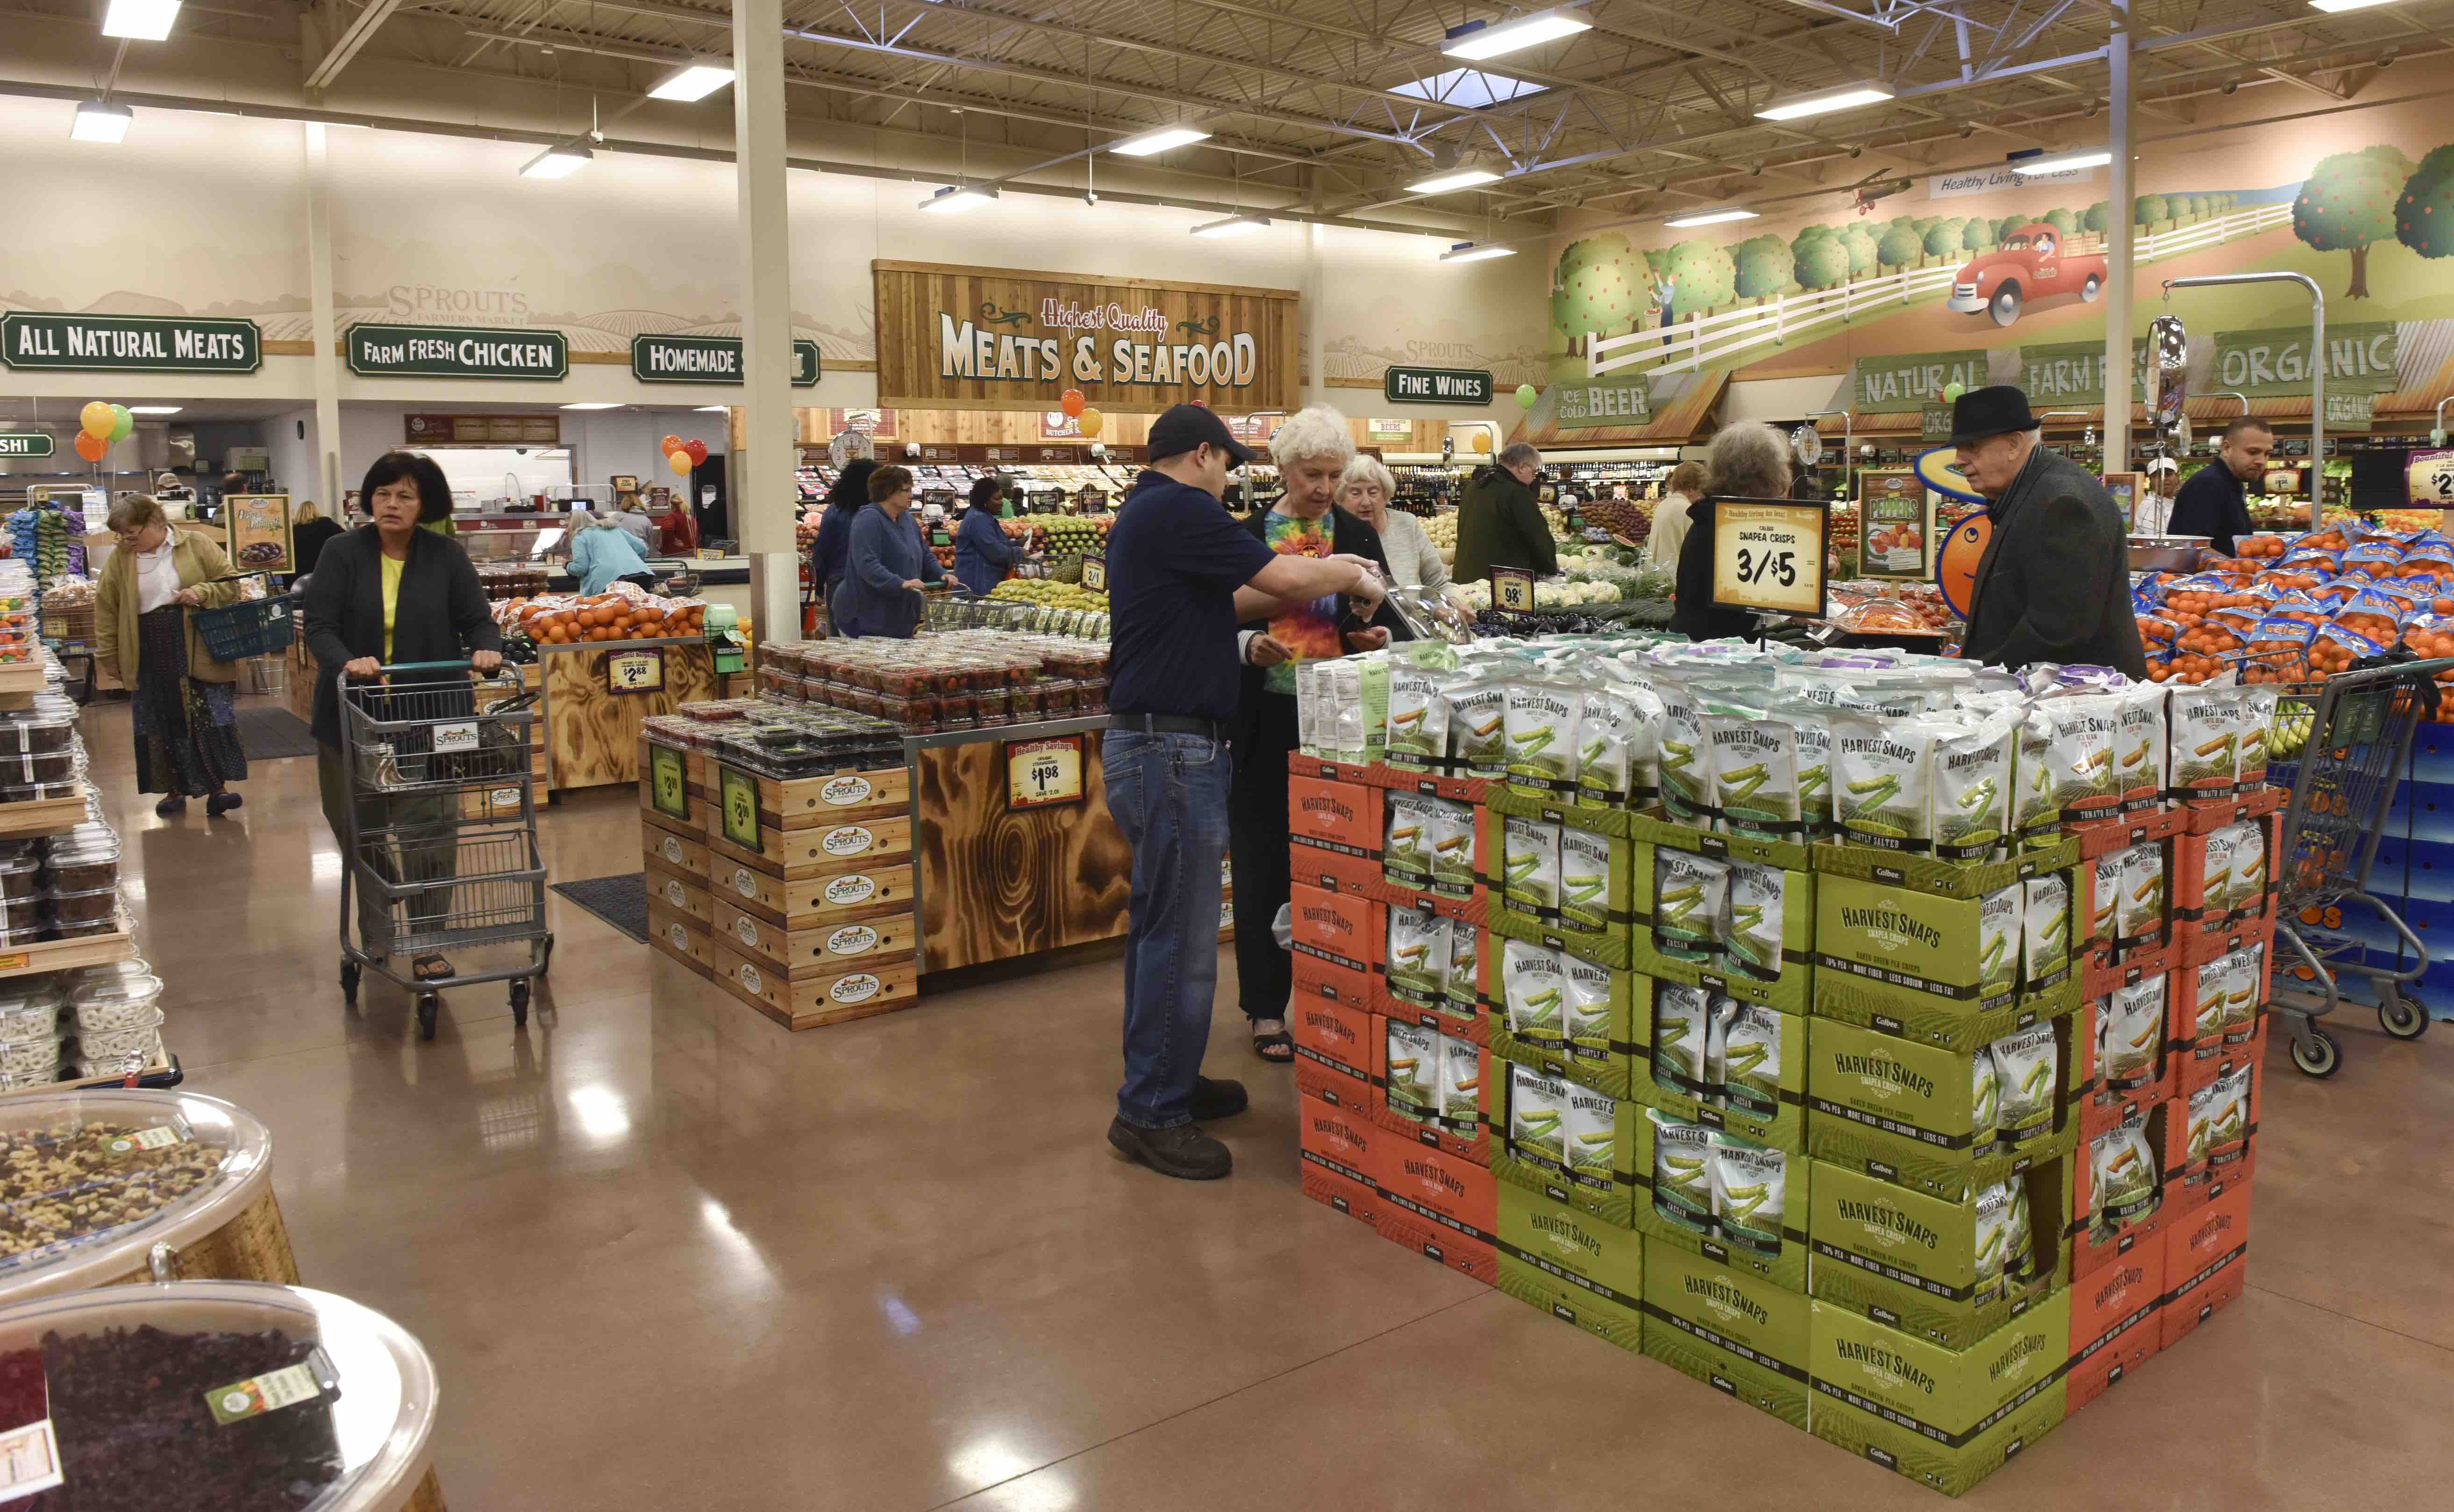 Sprouts Farmers Market Near Me See More on | Home ...